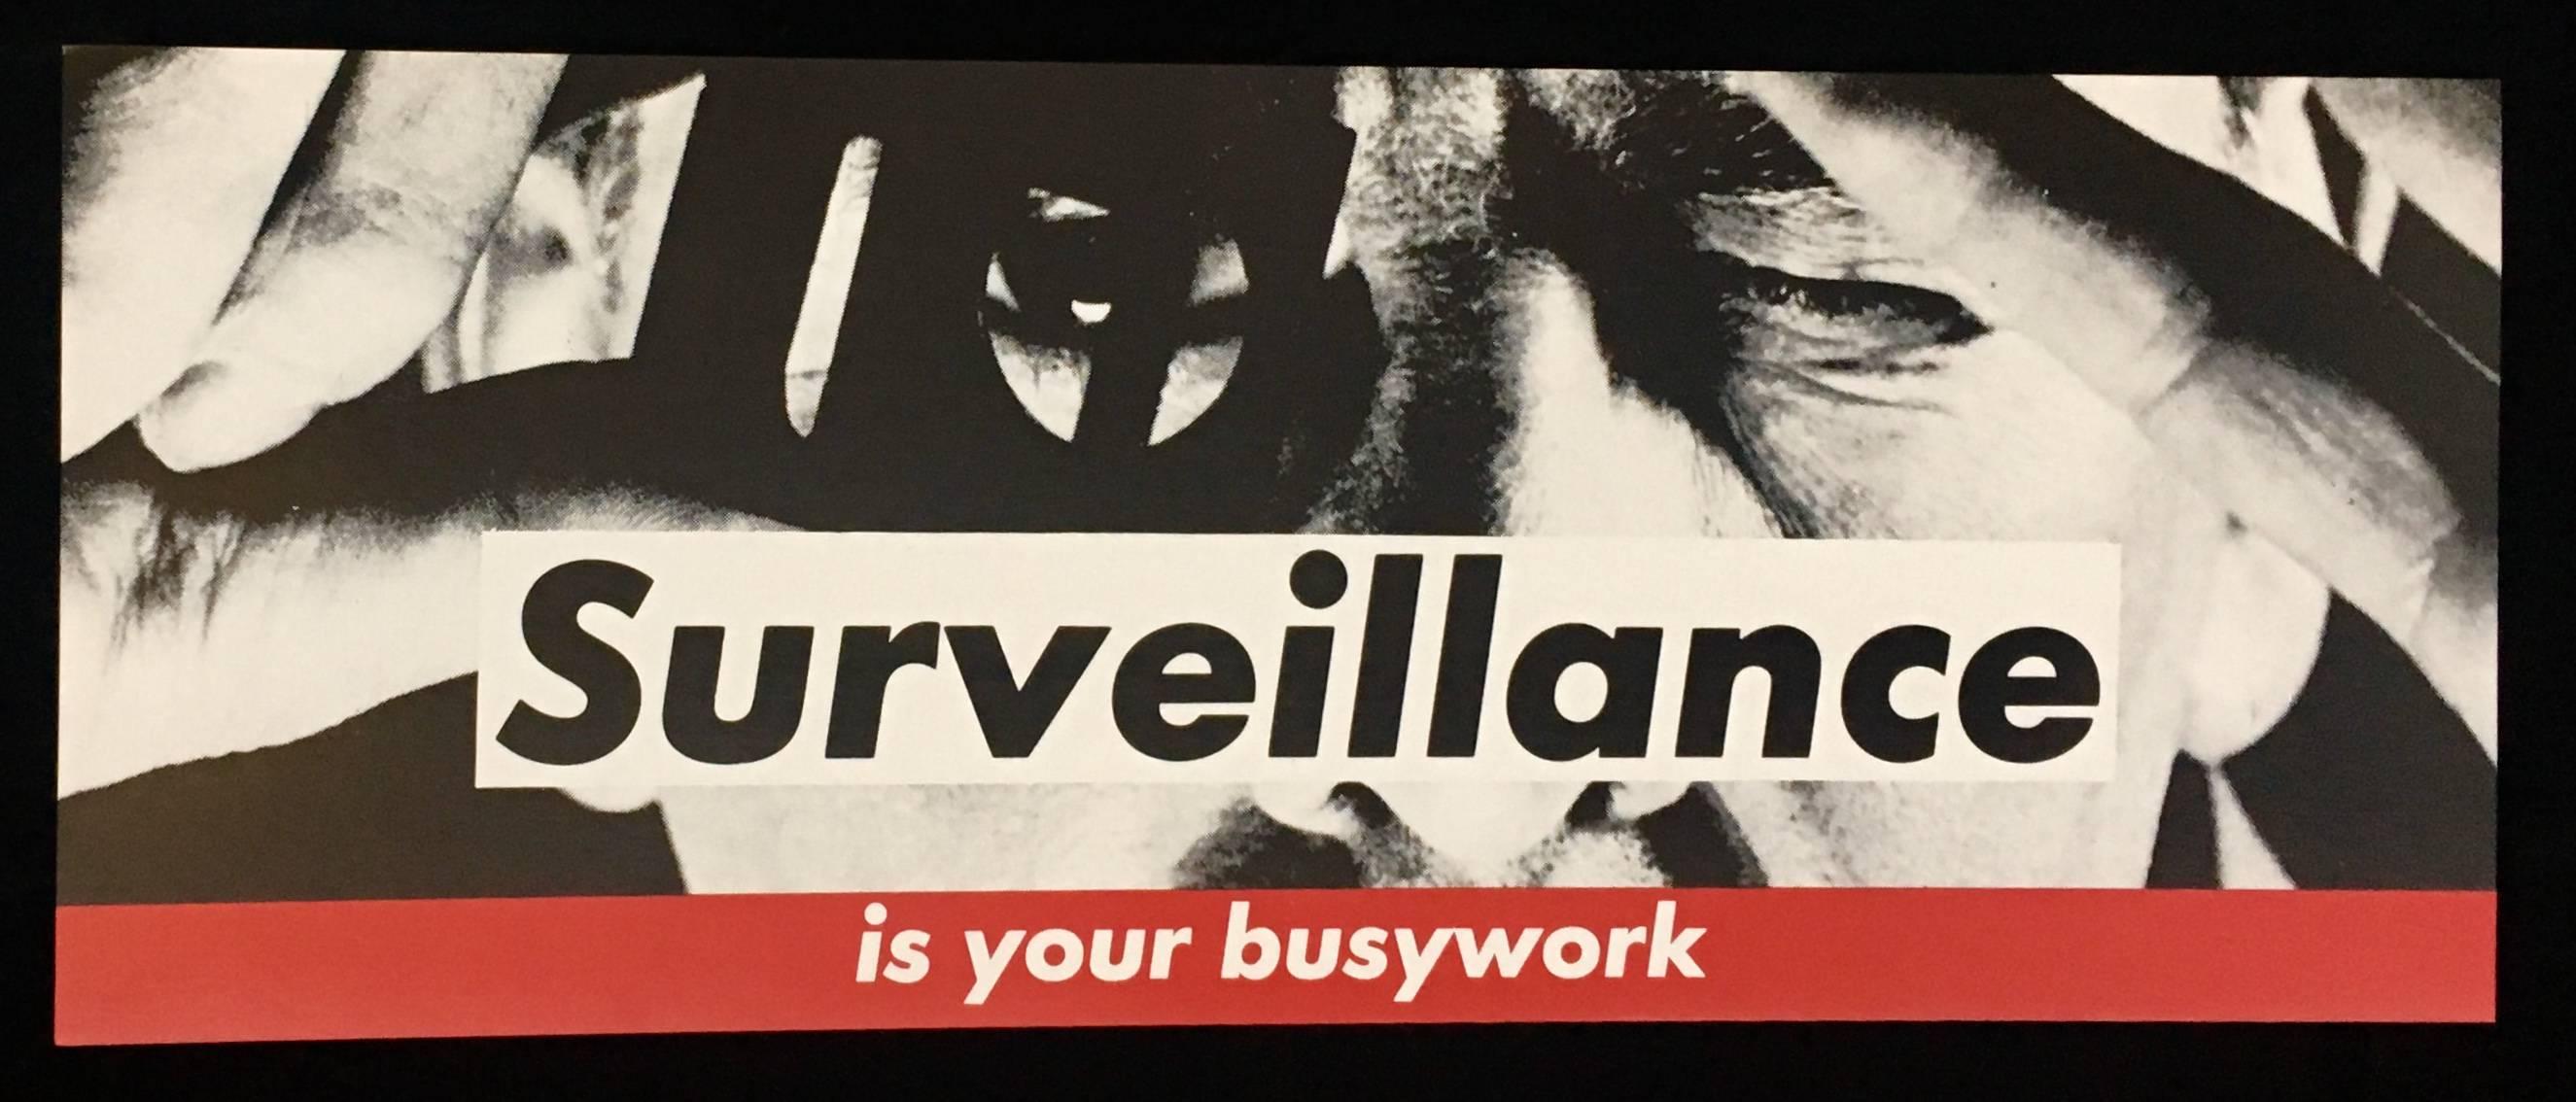 Barbara Kruger, ‘Surveillance is your busywork’, Rare Original Barbara Kruger public display piece, circa mid/early 1980s; produced by Kruger for a project with New York City’s Metro Transit Authority. A placard displayed throughout the city’s